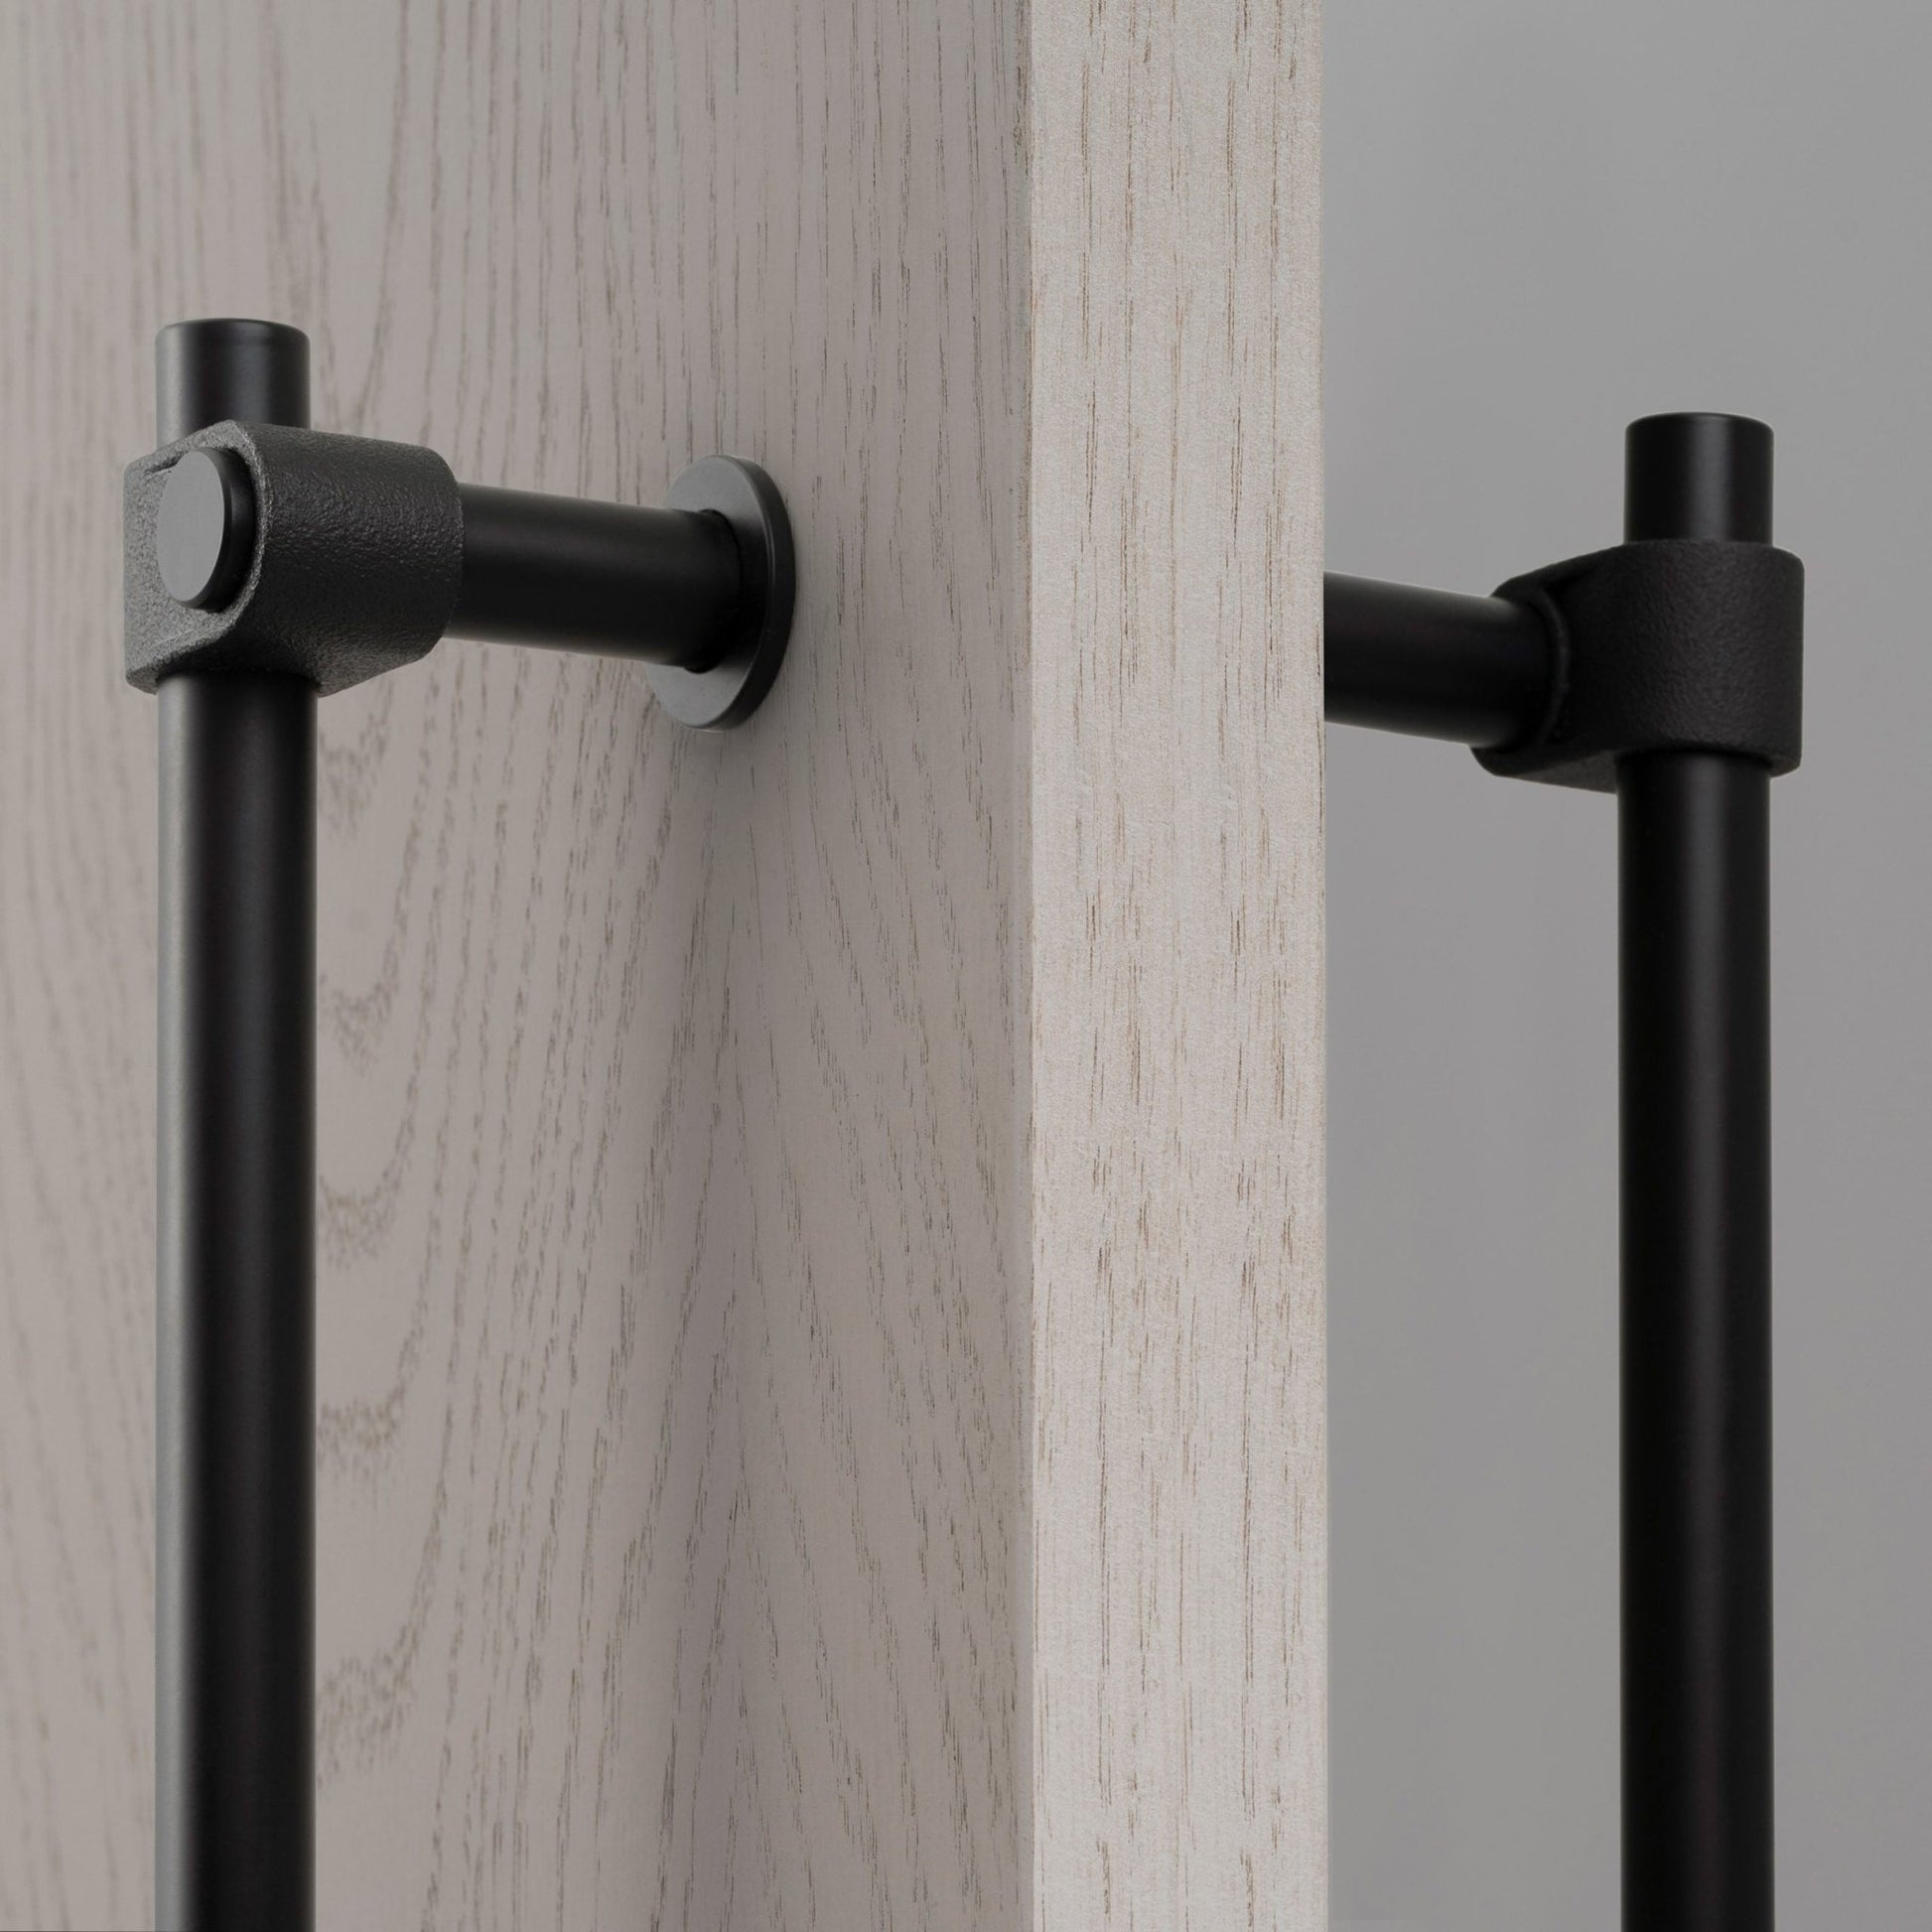 Matte Black Solid Double-Sided Pull Bar / Welders Black - |VESIMI Design| Luxury and Rustic bathrooms online